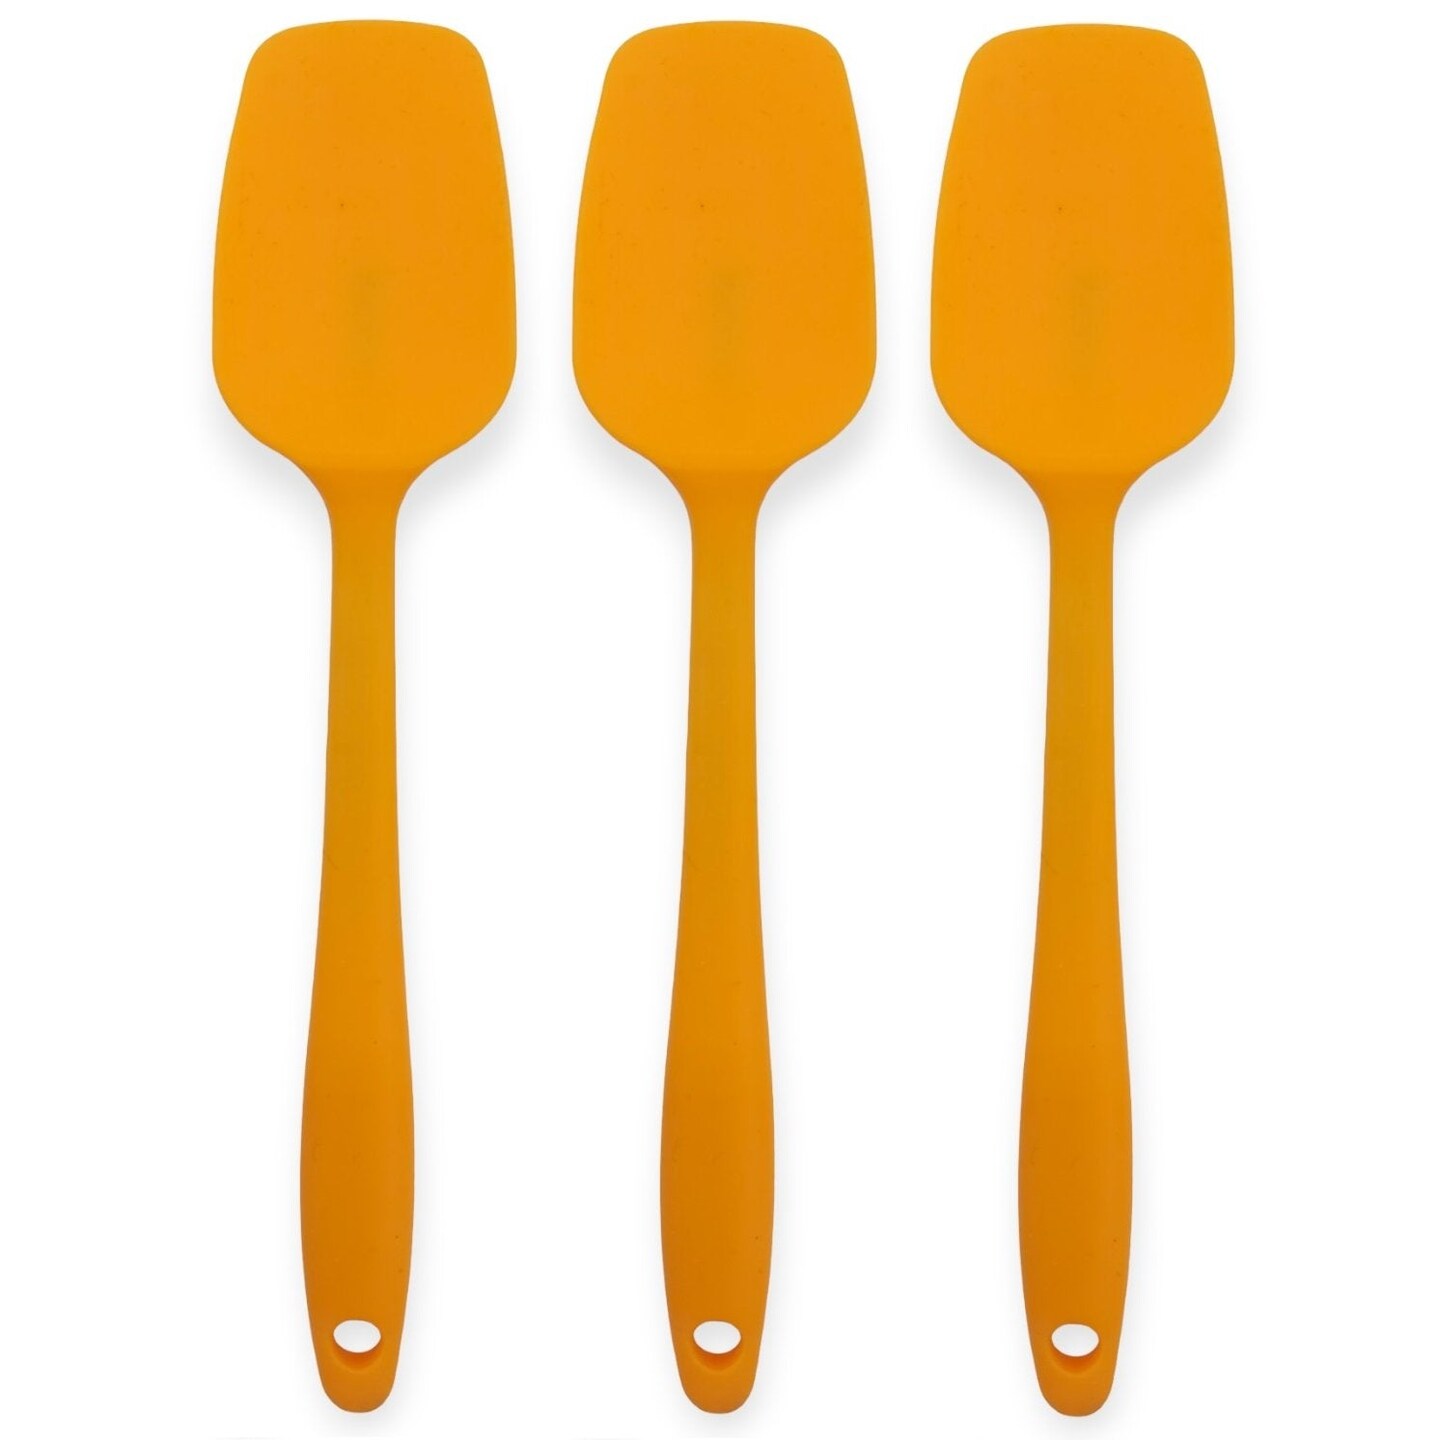 Handy Housewares 8 Long Non-Stick Silicone Mini Spoonula Spoon Spatula -  Great for Mixing, Bowl Scraper, Small Servings and more